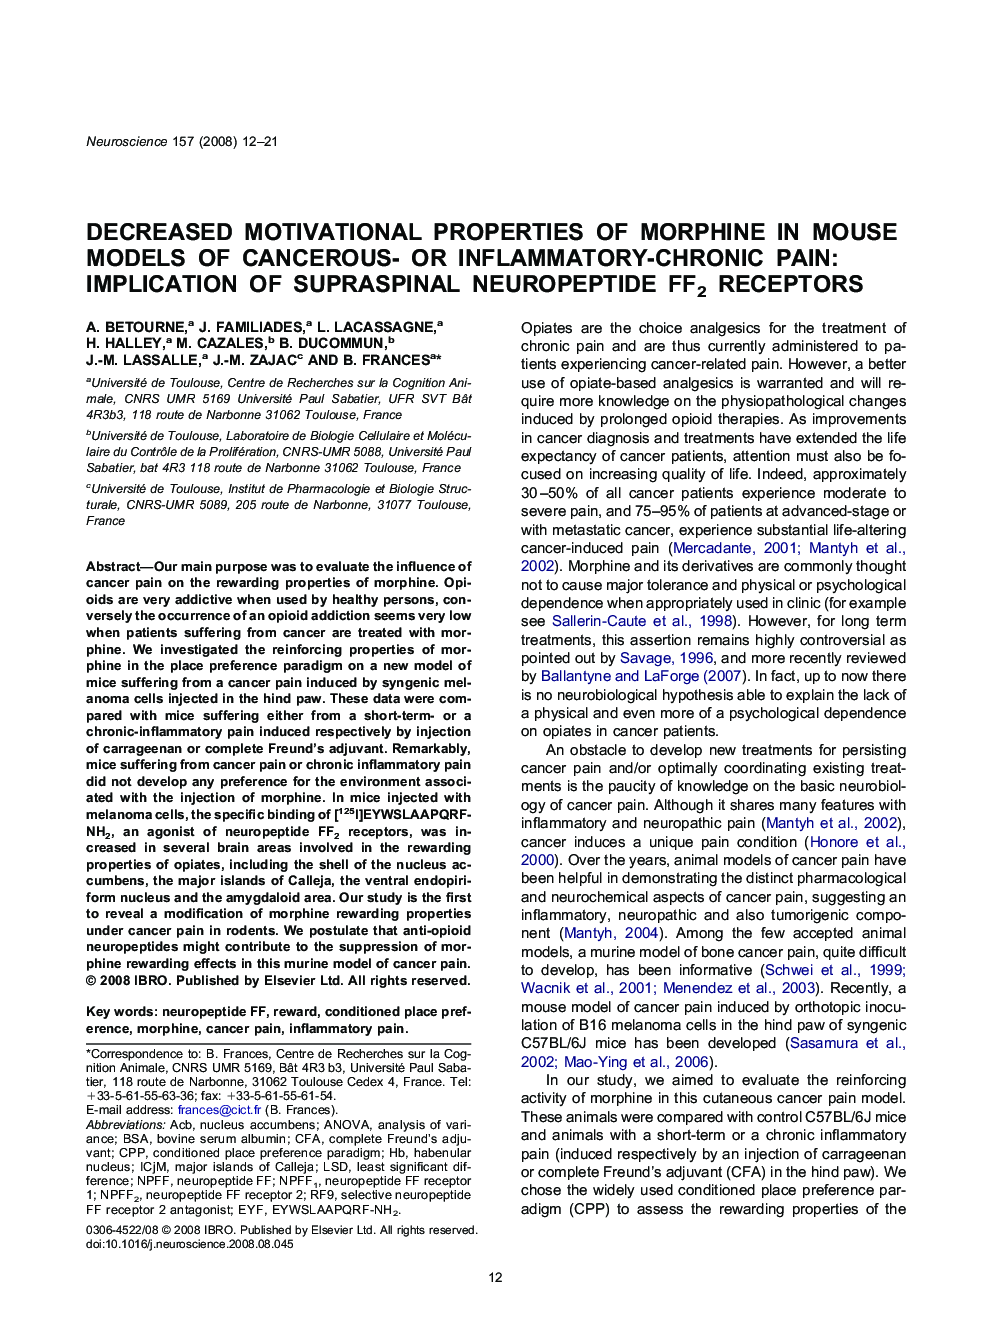 Decreased motivational properties of morphine in mouse models of cancerous- or inflammatory-chronic pain: Implication of supraspinal neuropeptide FF2 receptors